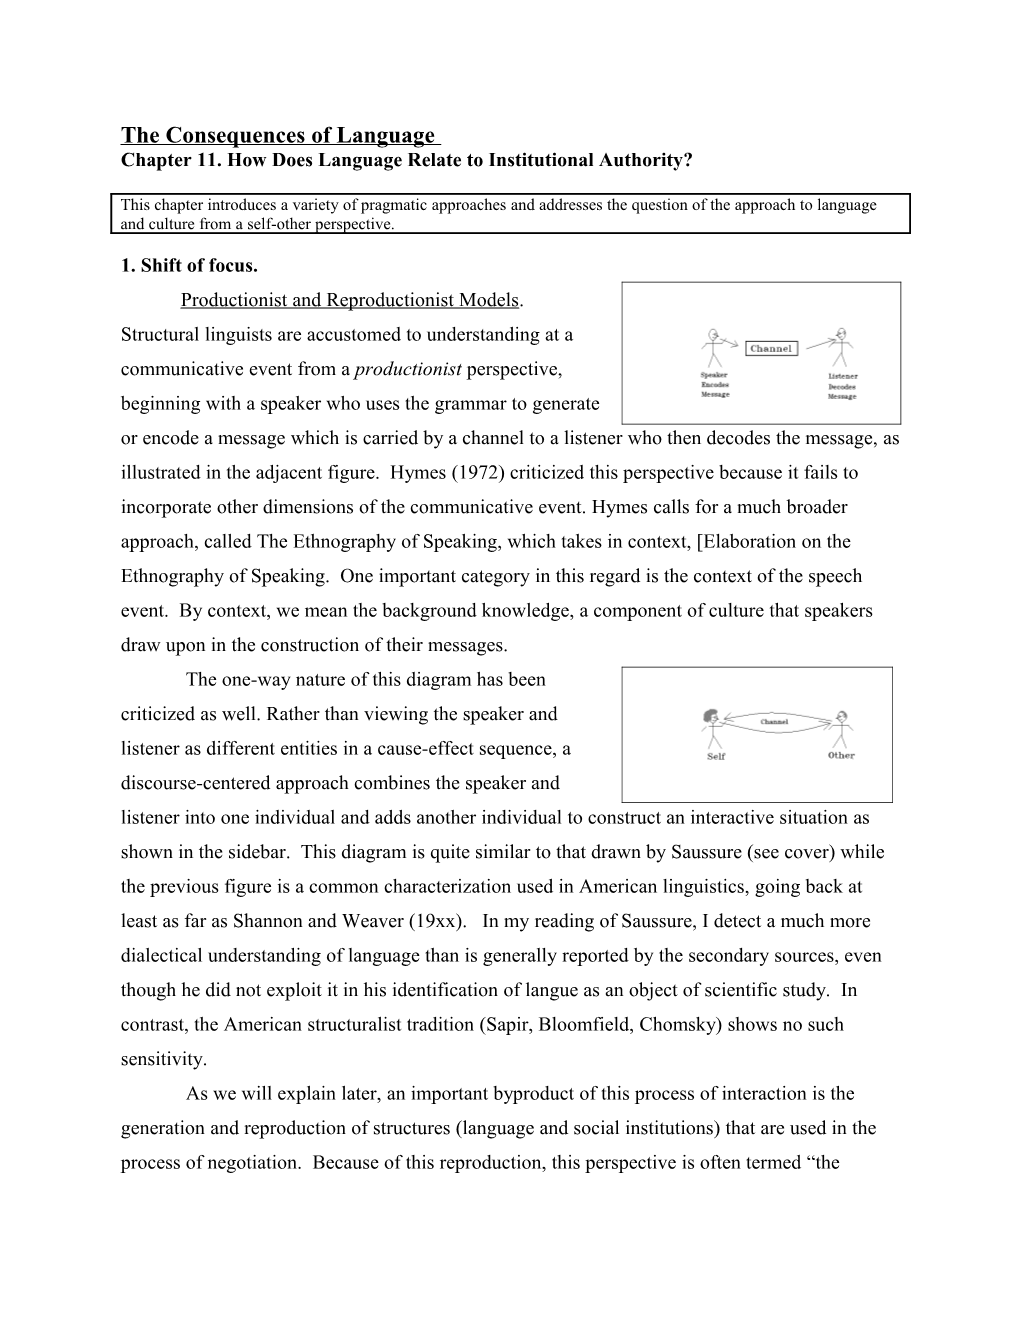 The Consequences of Language: Language and Institutional Authoritychapter 11, Page 1